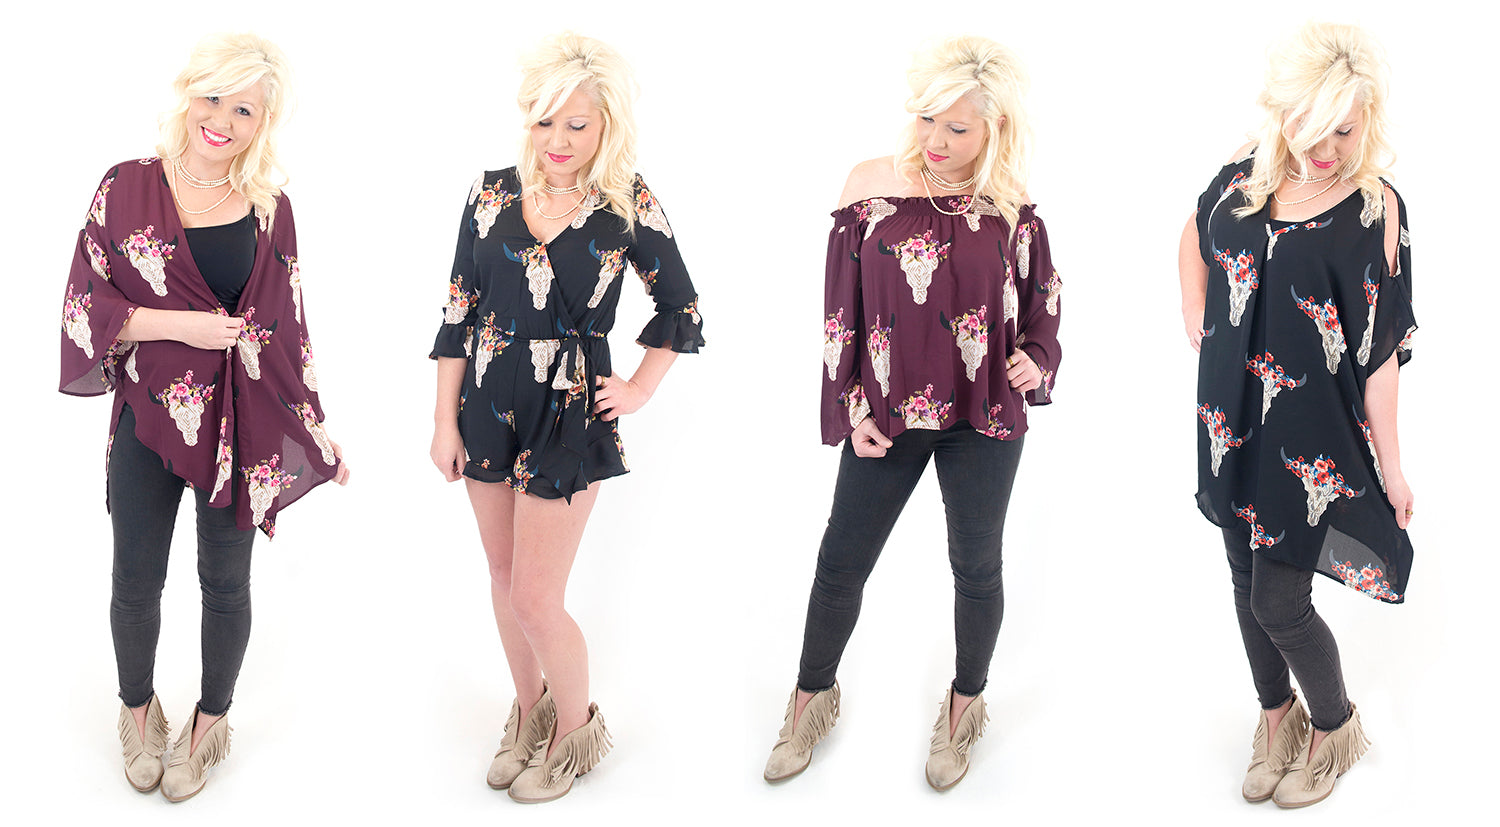 Lauren's favorite fall trend is bullhead floral print romper, kimono, off the shoulder top and tunic